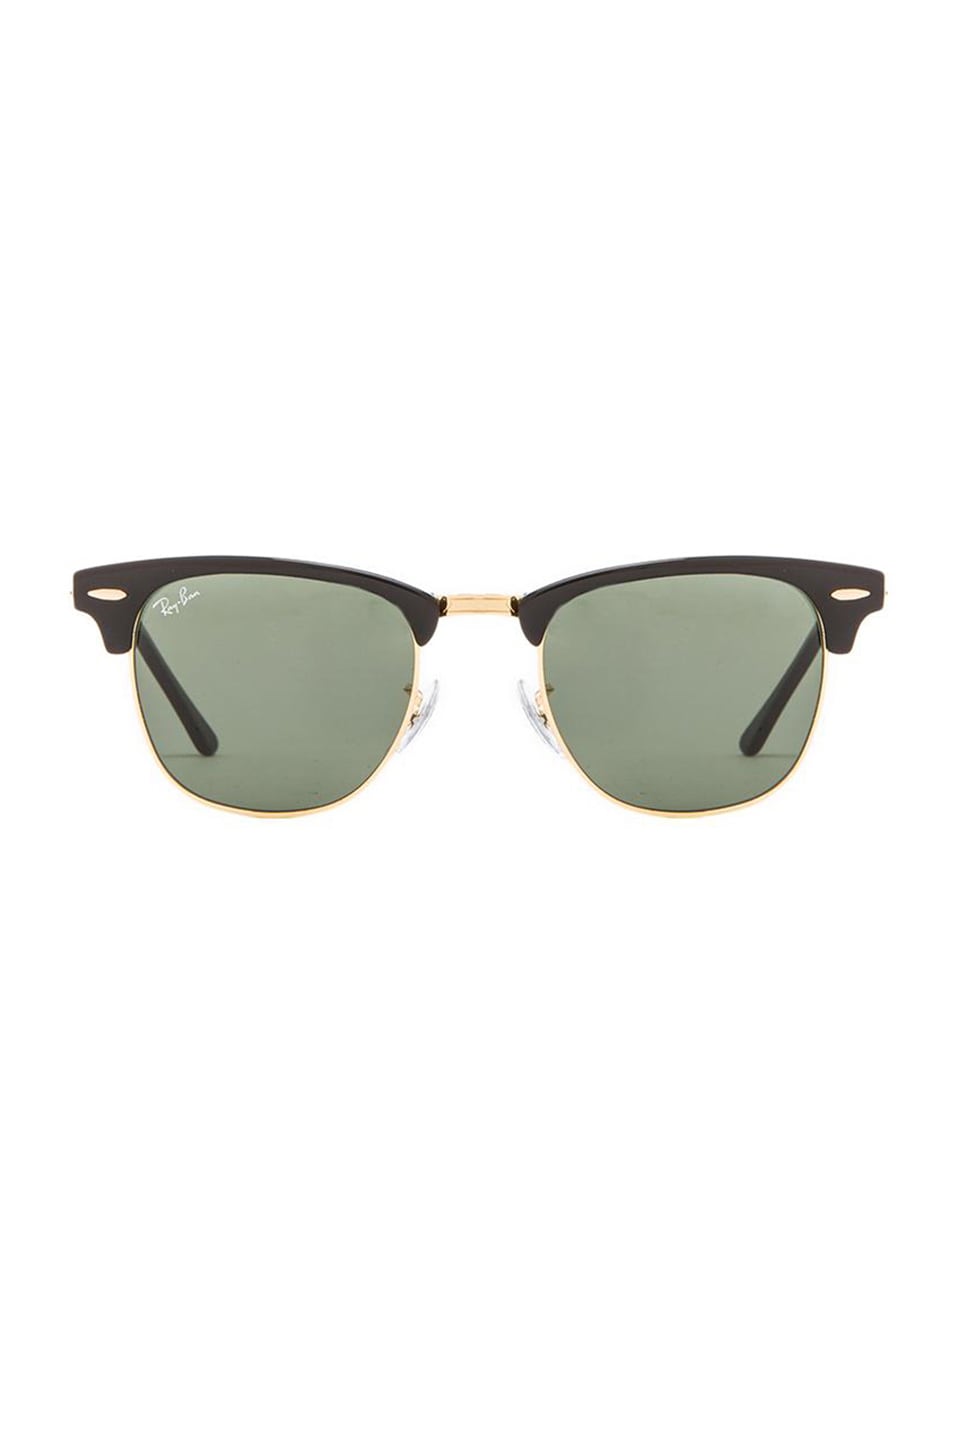 Ray Ban Clubmaster Classic In Black Revolve